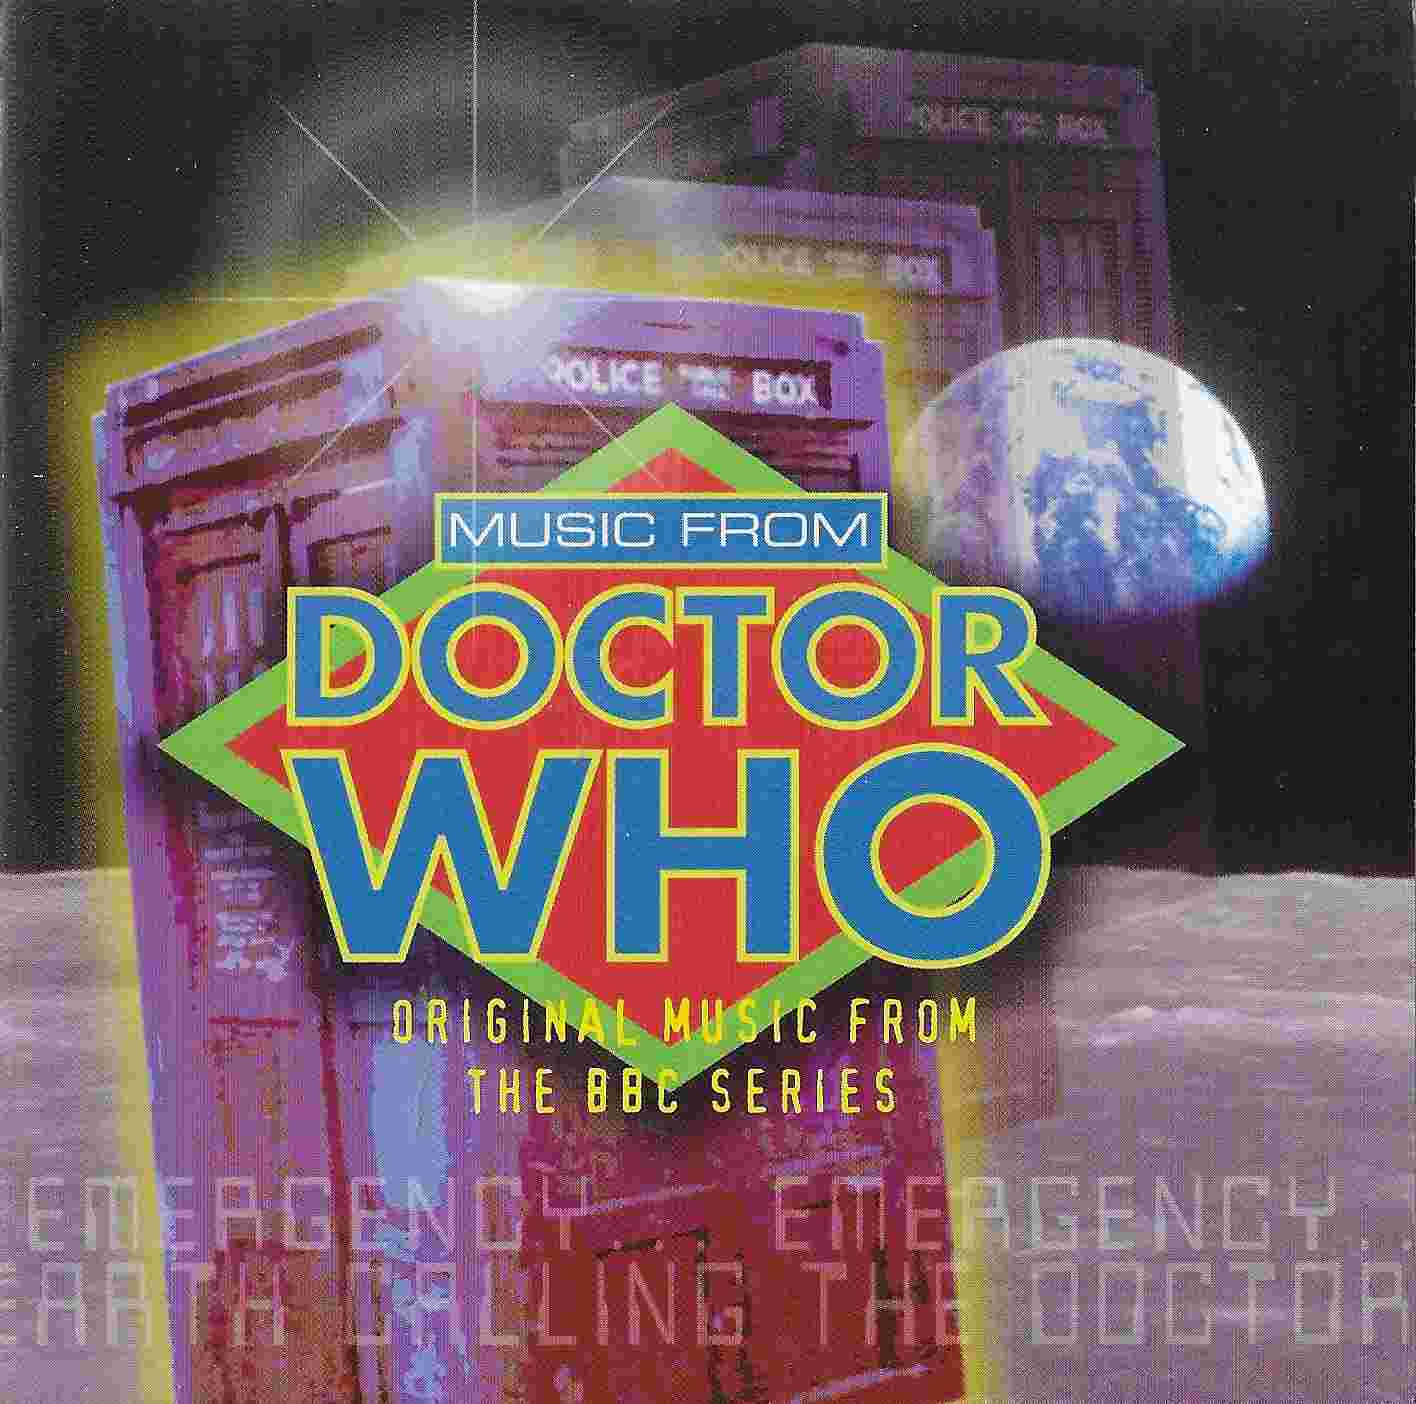 Picture of PLSCD 579 Doctor Who - Original music from the series by artist Various from the BBC records and Tapes library